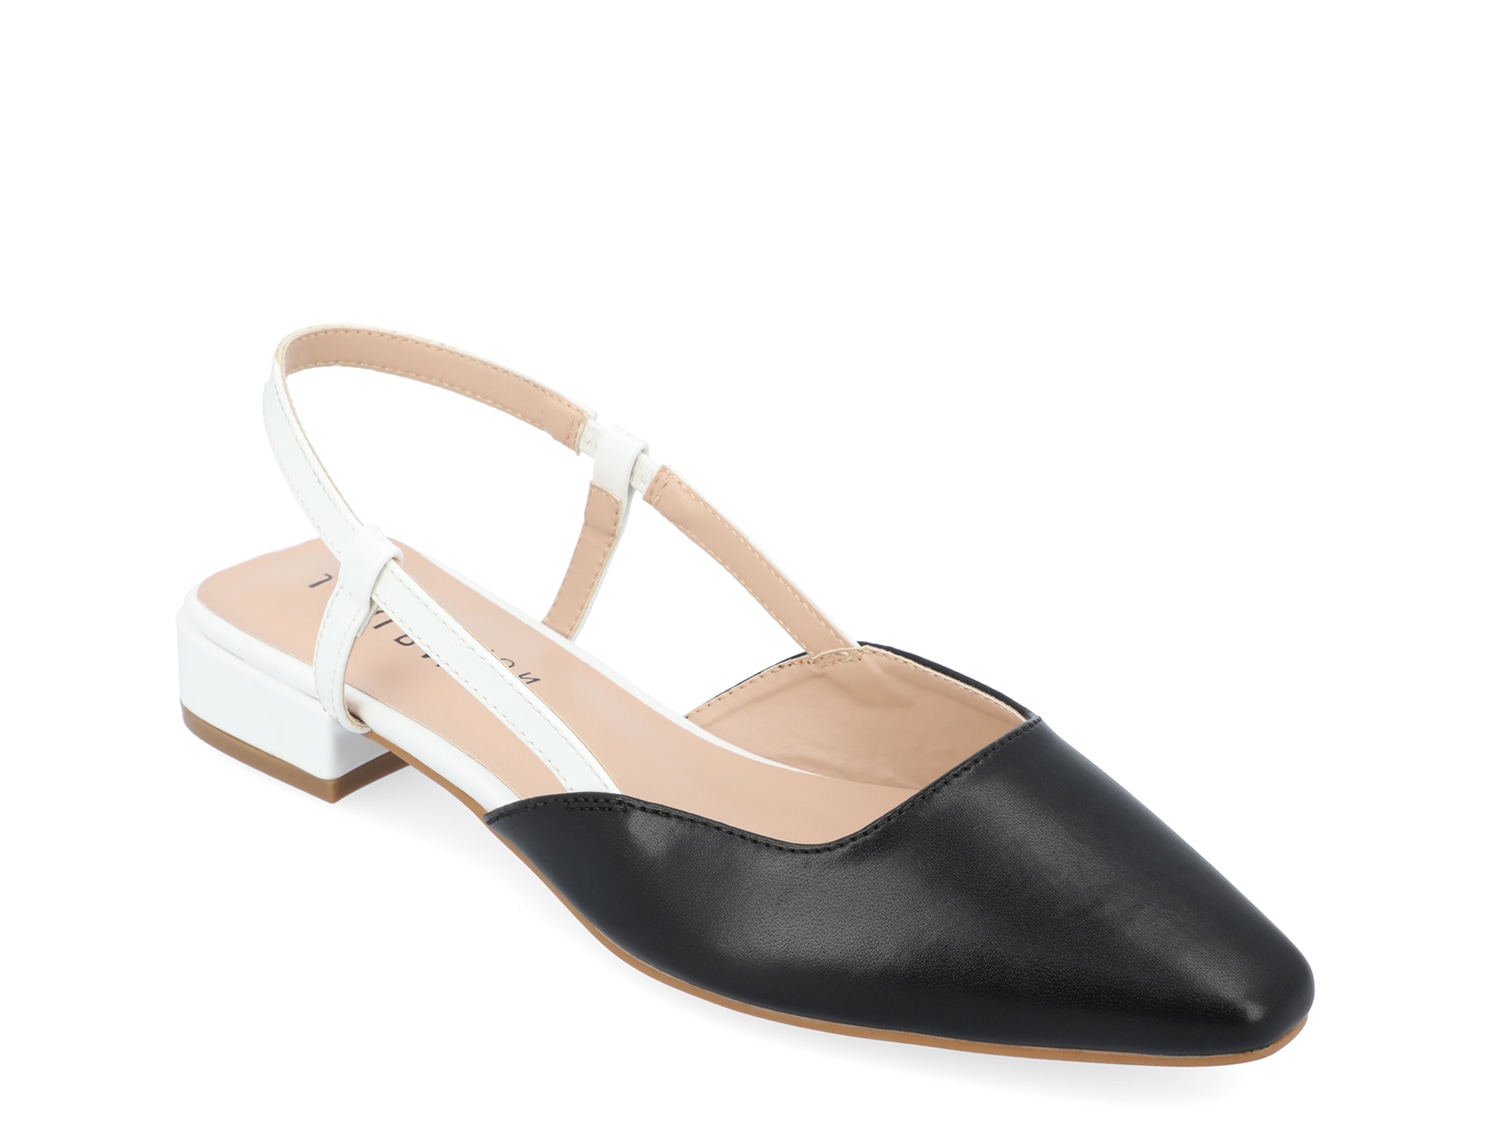 Journee Collection Paislee Flat - Free Shipping | DSW